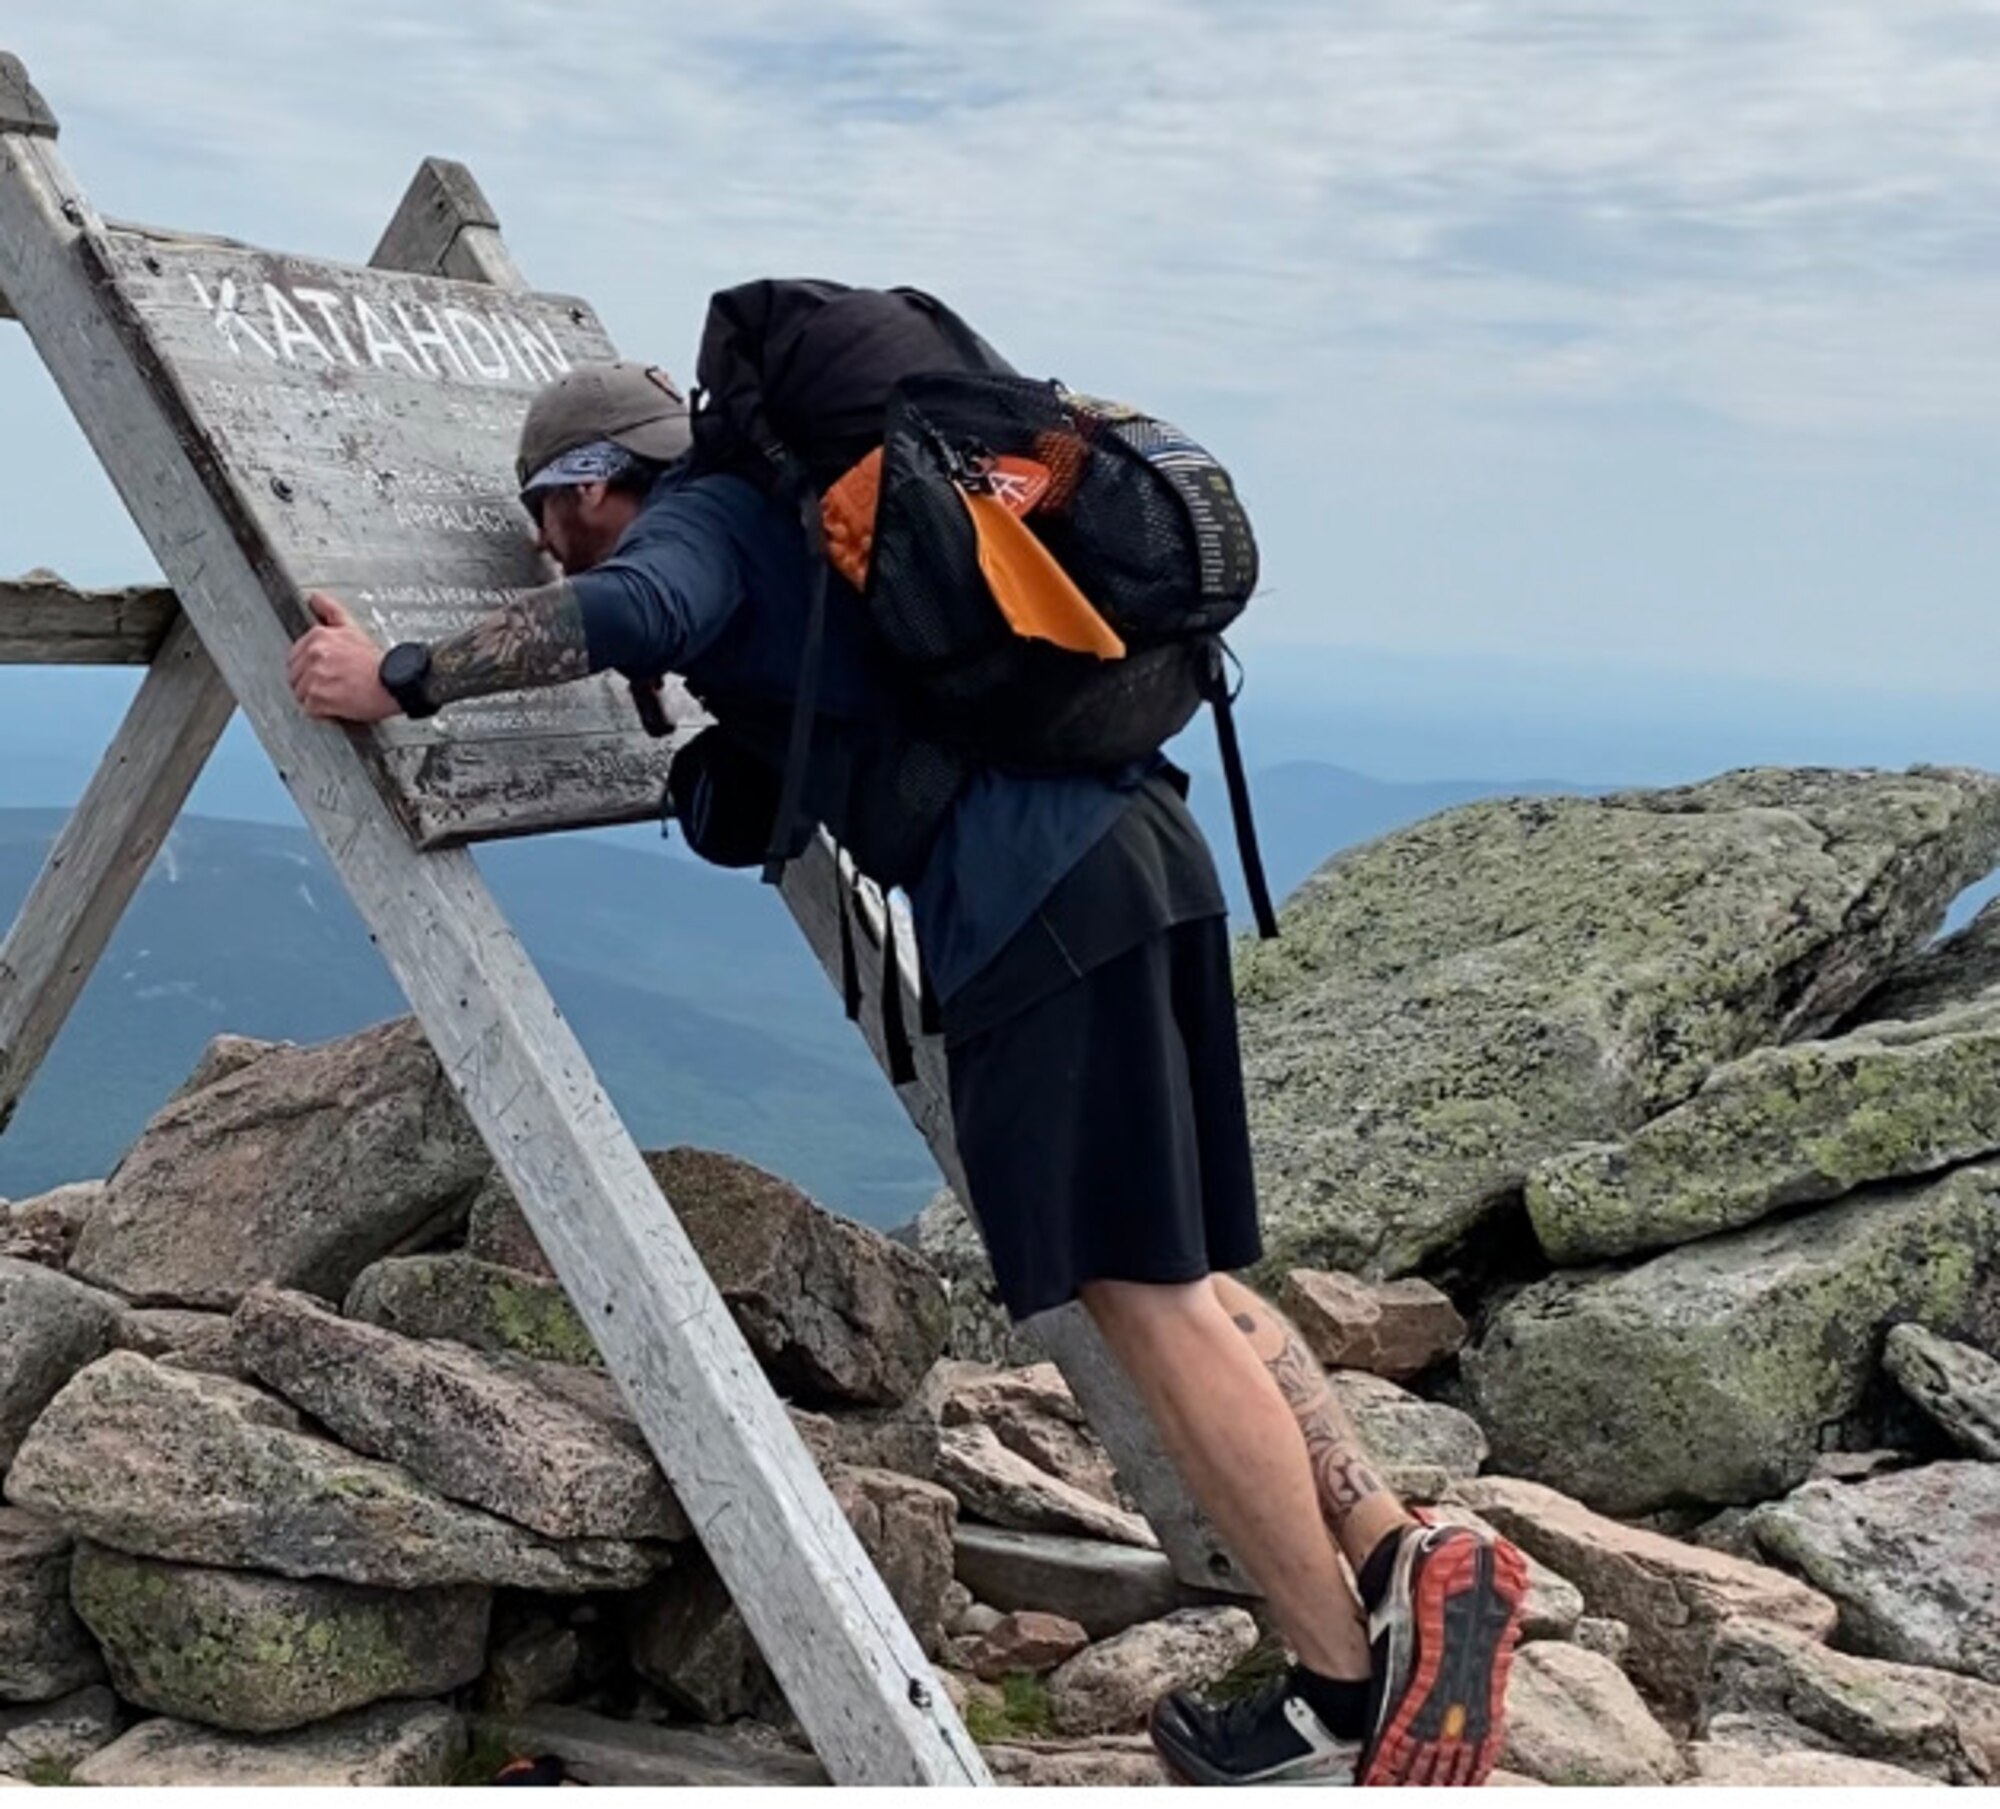 Senior Master Sgt. (Ret.) Greg Pfeiffer, a former OSI Special Agent who currently serves as a Junior Reserve Officers Training Corps instructor, raised $20,000 in charity while hiking the entire course of the Appalachian Trail in 2021